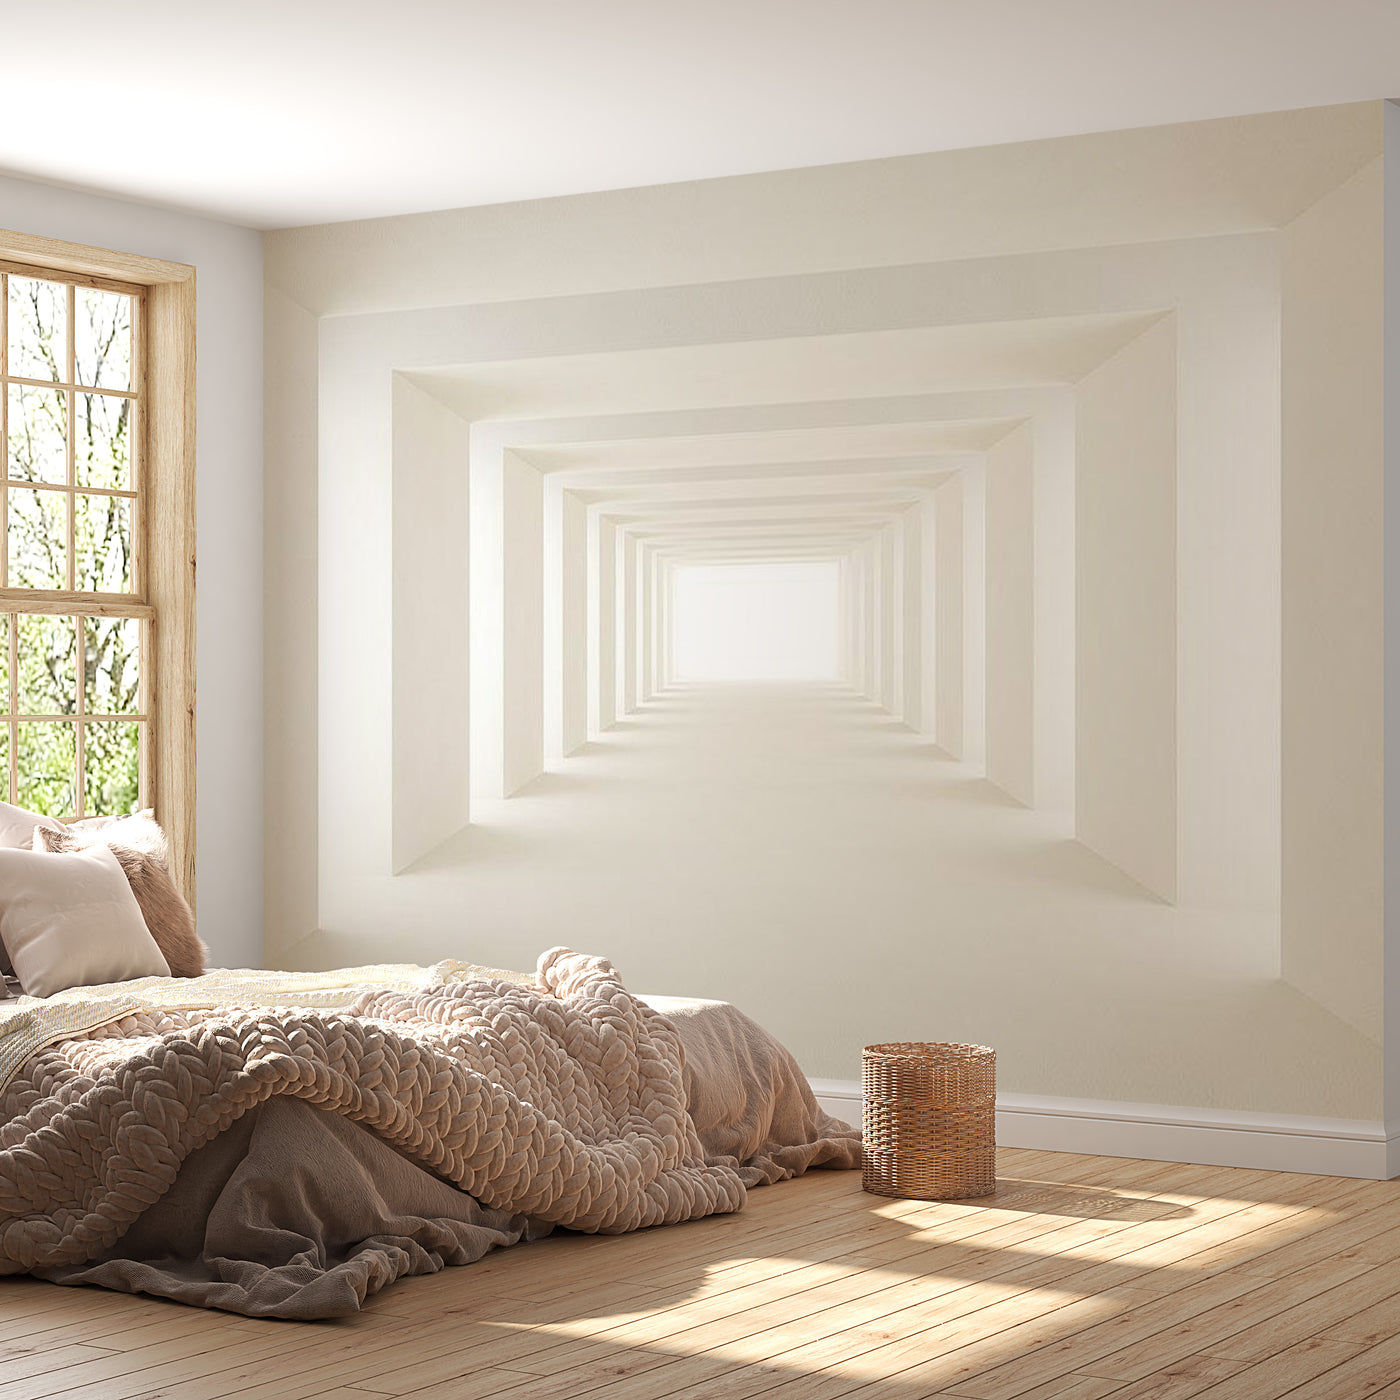 Peel & Stick 3D Illusion Wall Mural - Into The Light - Removable Wall Decals